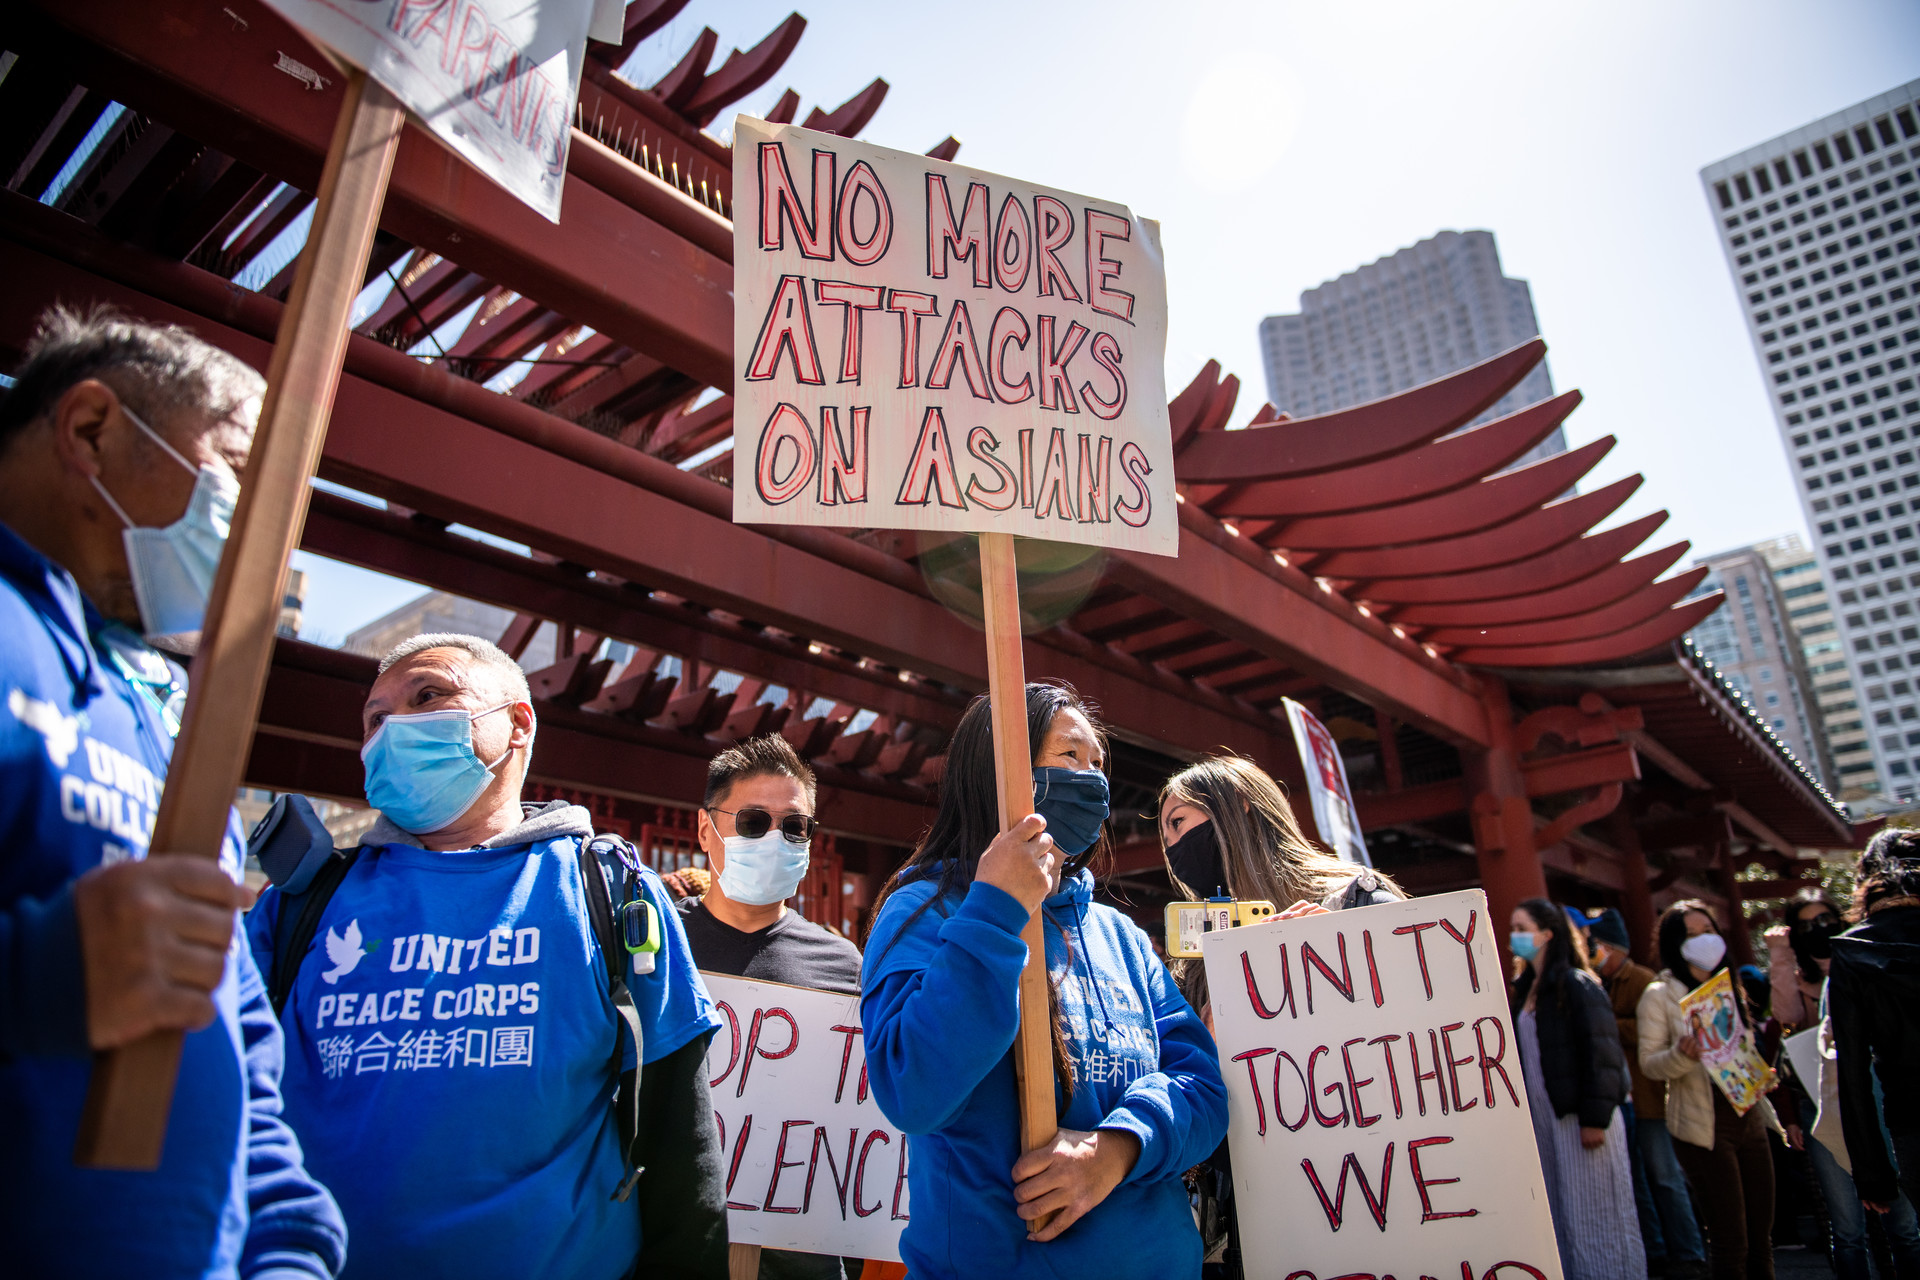 Four people wearing masks , with two people wearing blue t-shirts hold signs that read "no more attacks on Asians" and "Unity together."